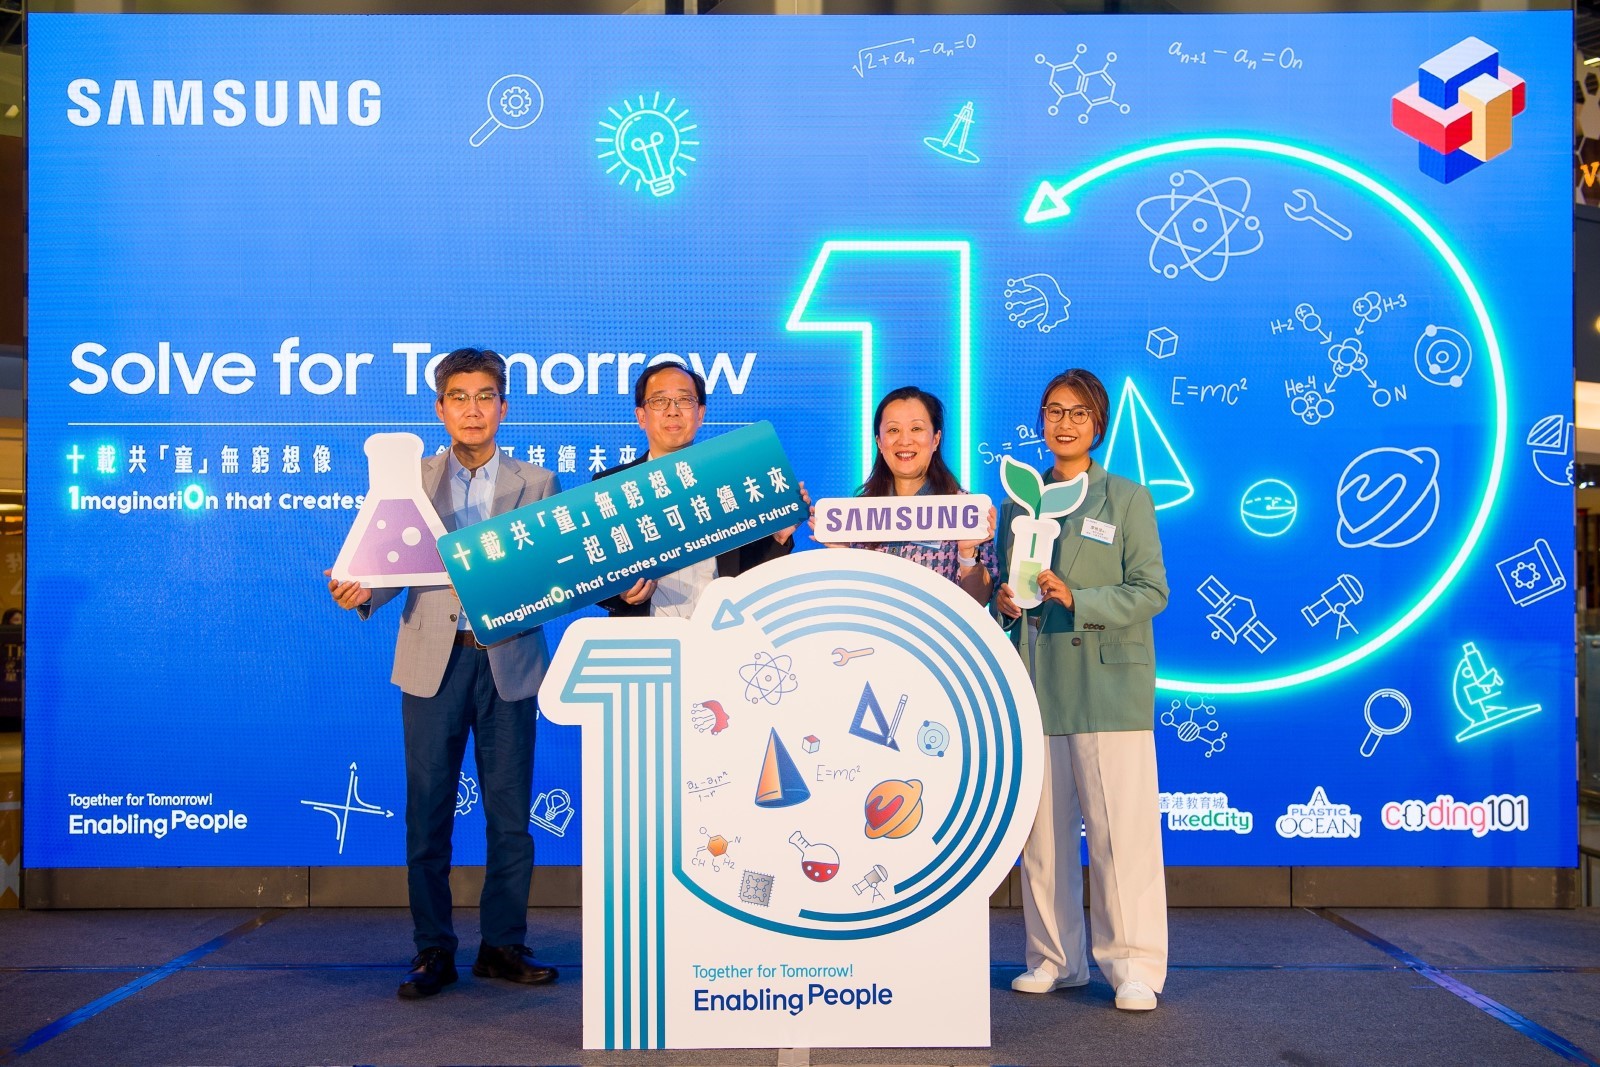 (From the left) Jeffrey Lee, Co-founder of Coding101, Albert Wong, Chairman of AiTLE, Ms. Yiyin Zhao, Managing Director at Samsung Electronics Hong Kong, Dr. Liu, ESG Director of A Plastic Ocean Foundation kicked off the event, marking the official start of Samsung Solve for Tomorrow 2023.